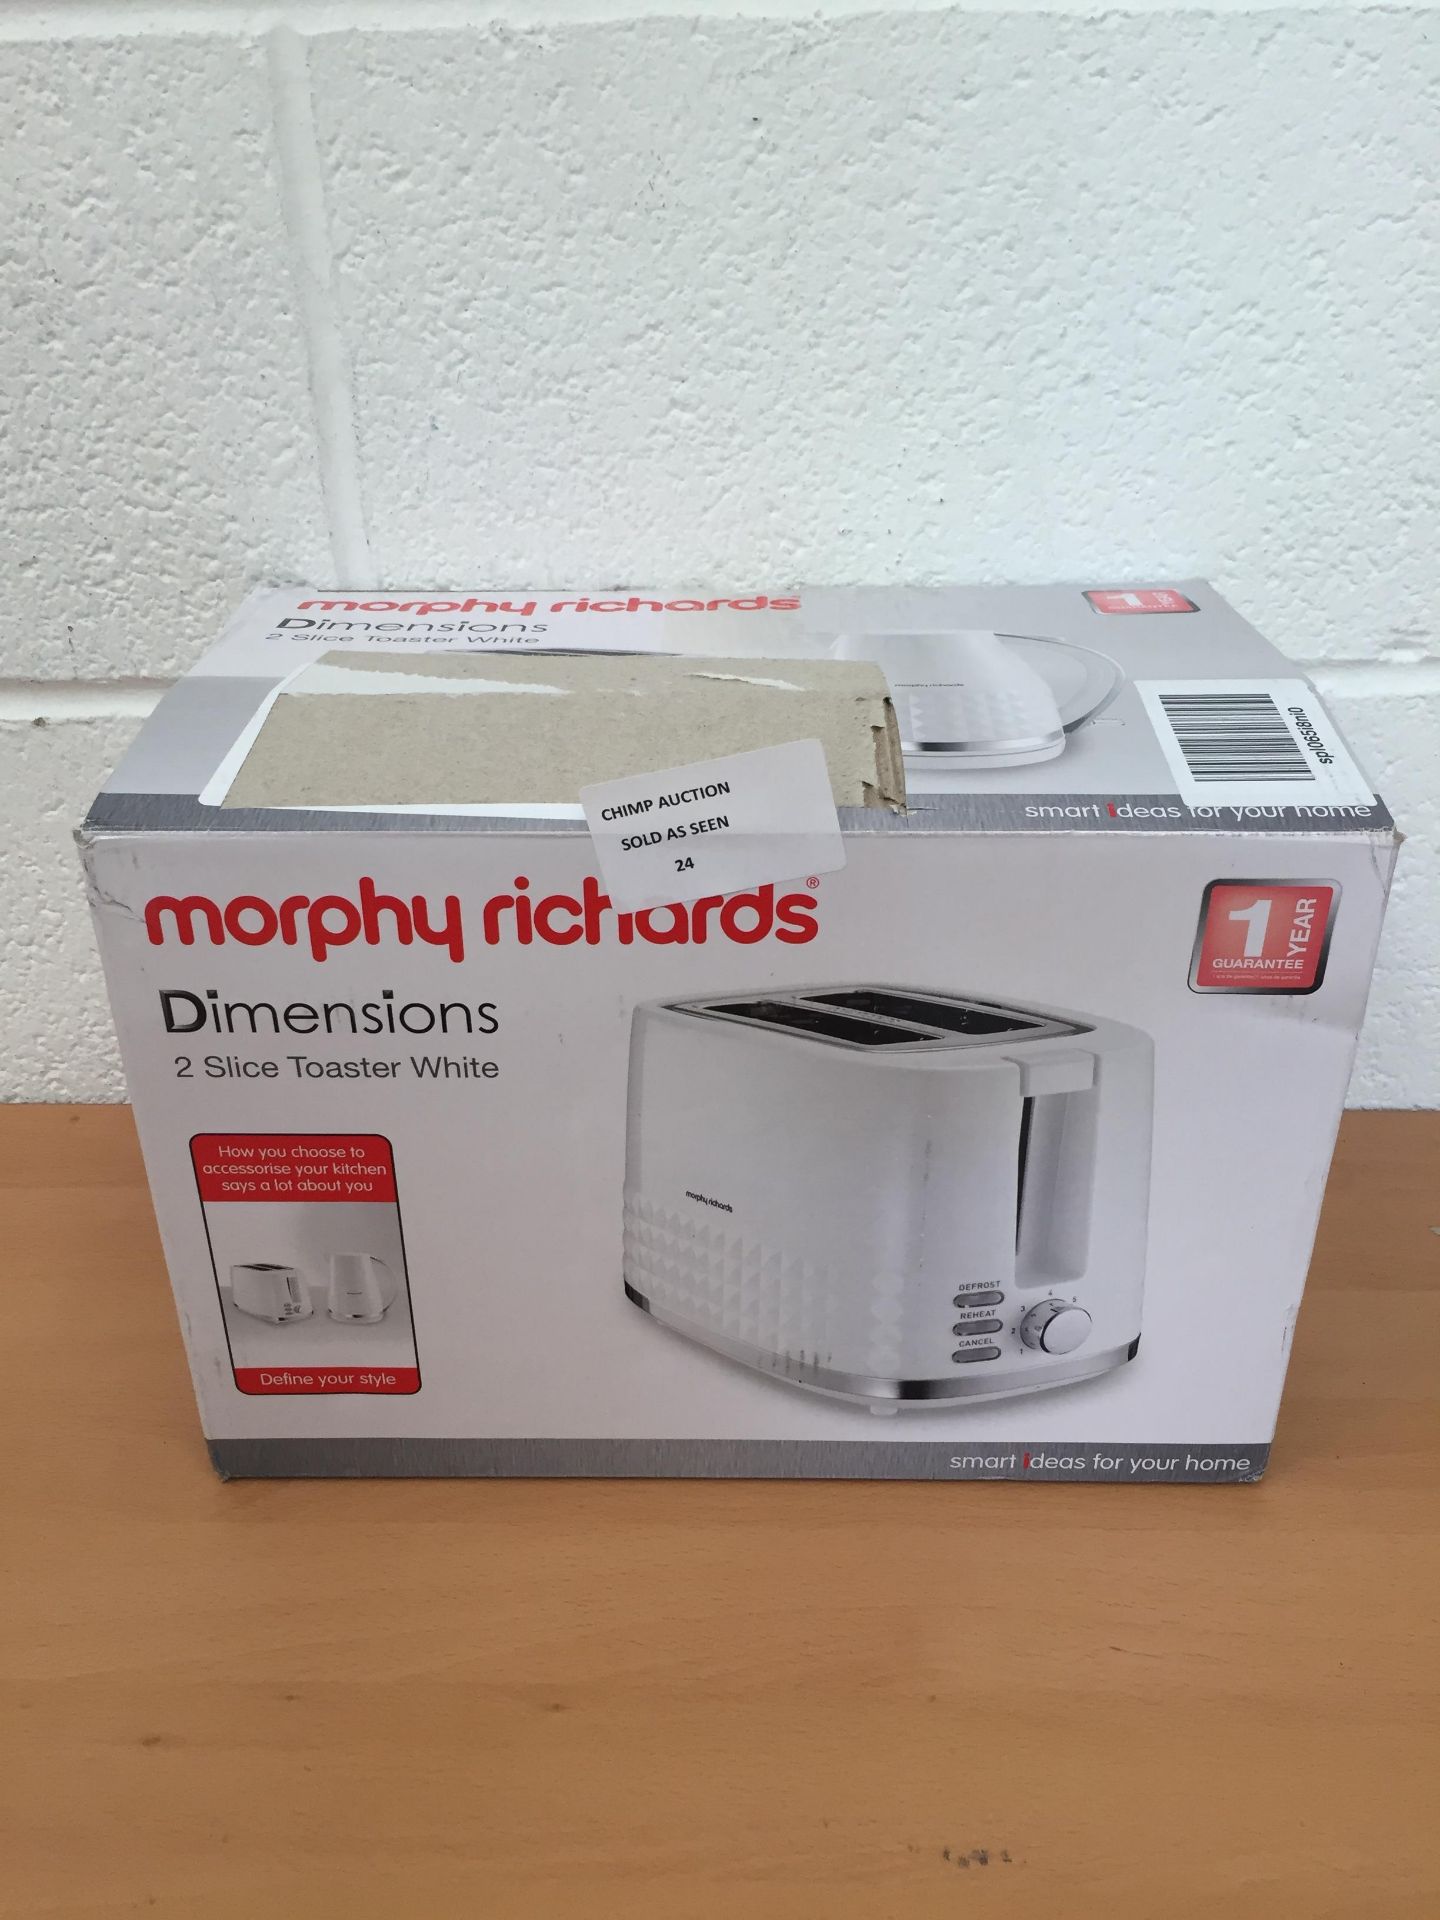 Morphy Richards Dimensions 2 slice toaster